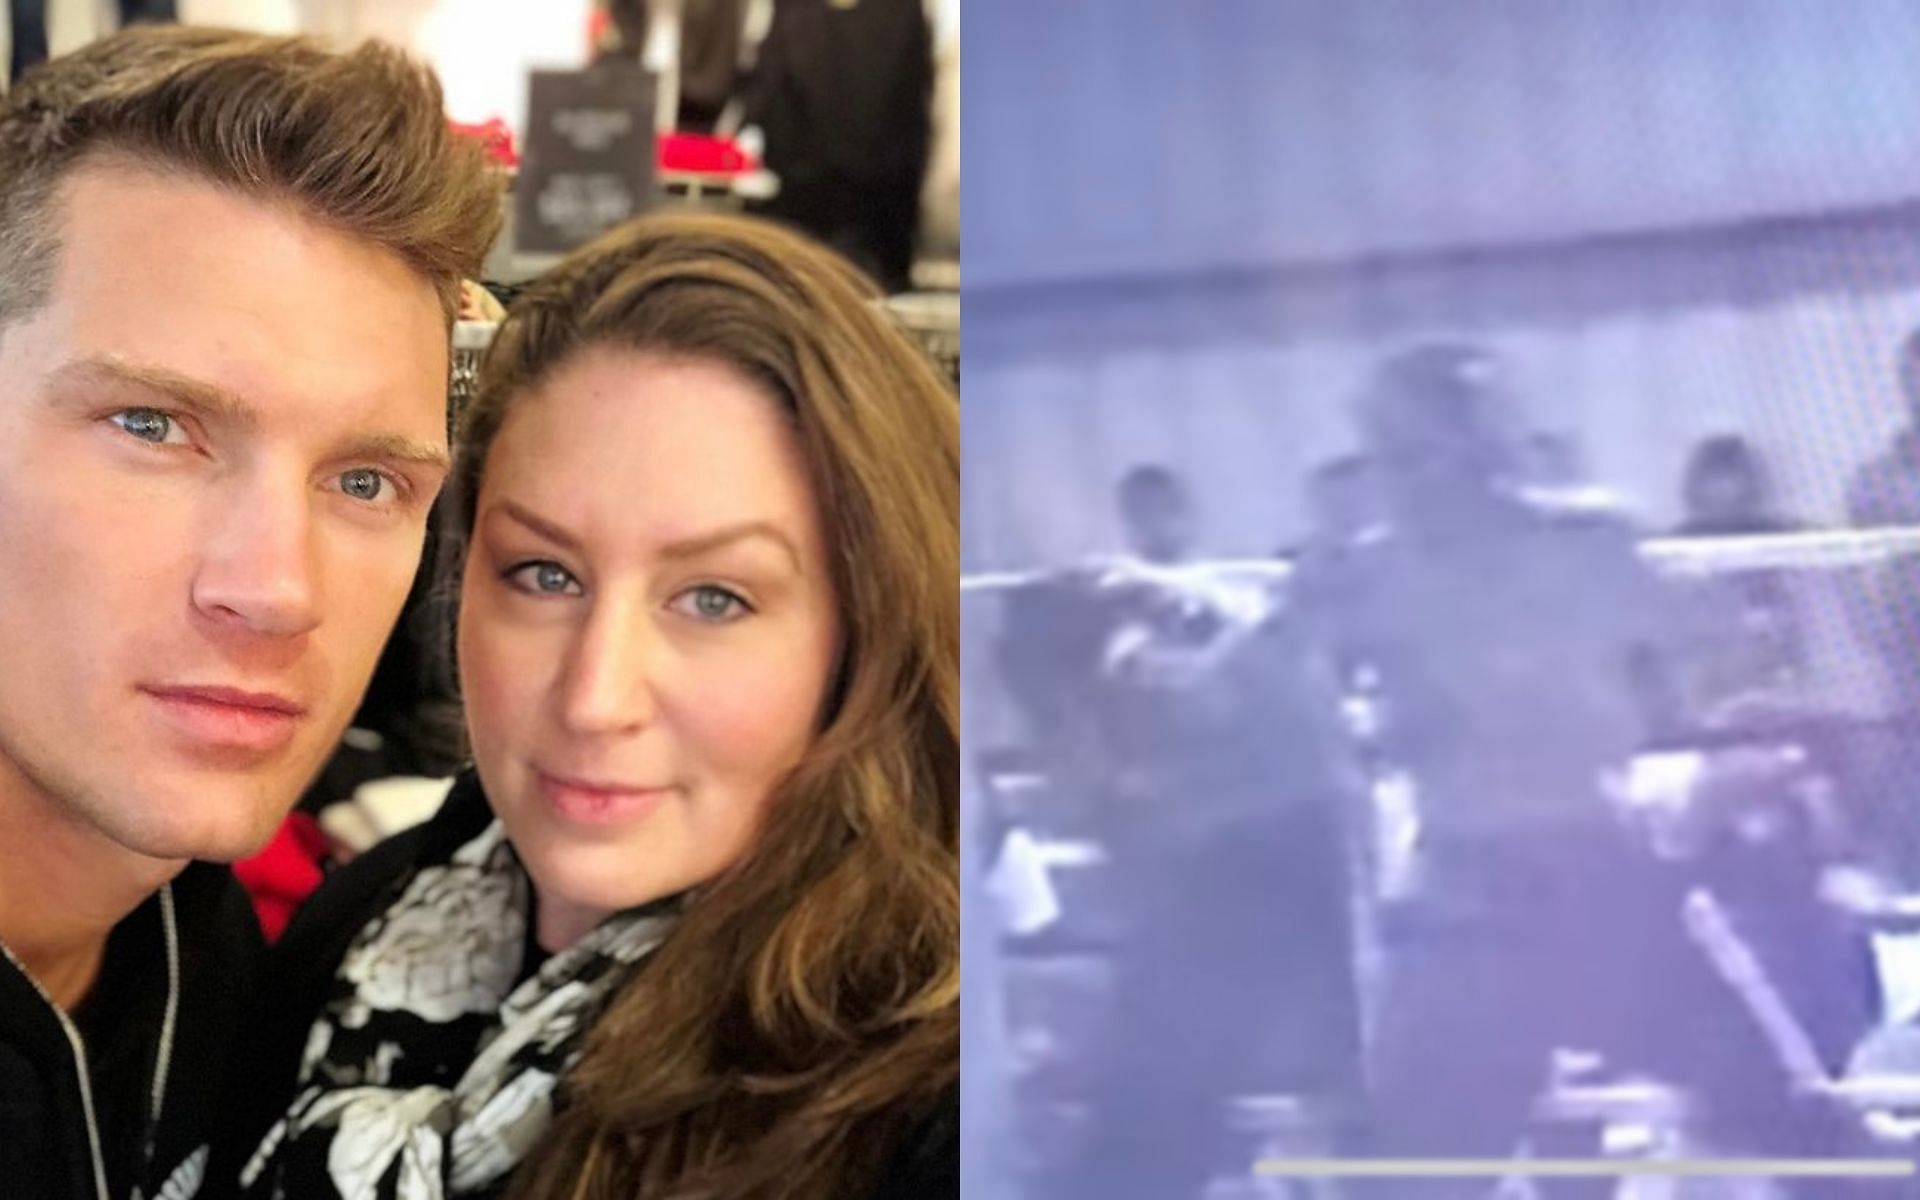 Stephen Thompson (left), his sister Lindsay (middle)(Image via Instagram @WonderBoyMMA), and an image of the video mentioned (Image via YouTube @Stephen Wonderboy Thompson)